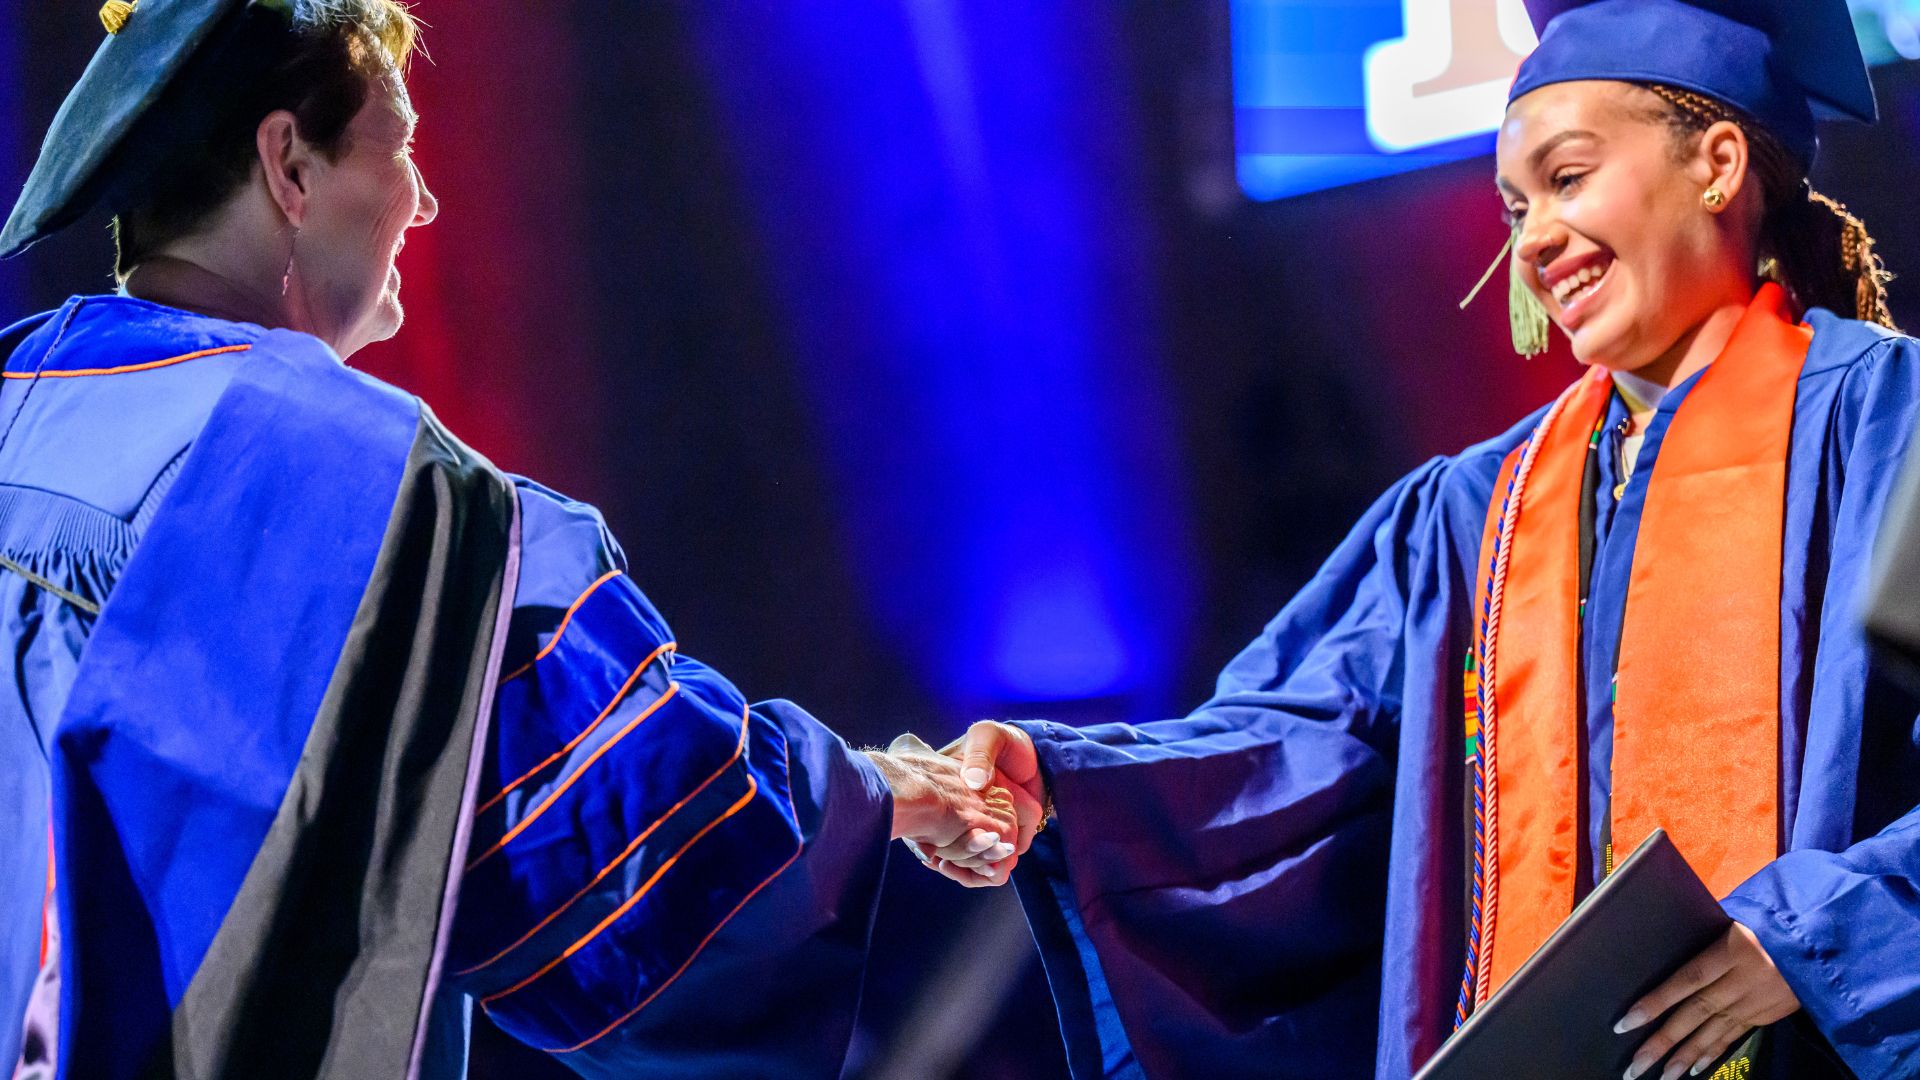 A graduate student and a professor exchanging a handshake.